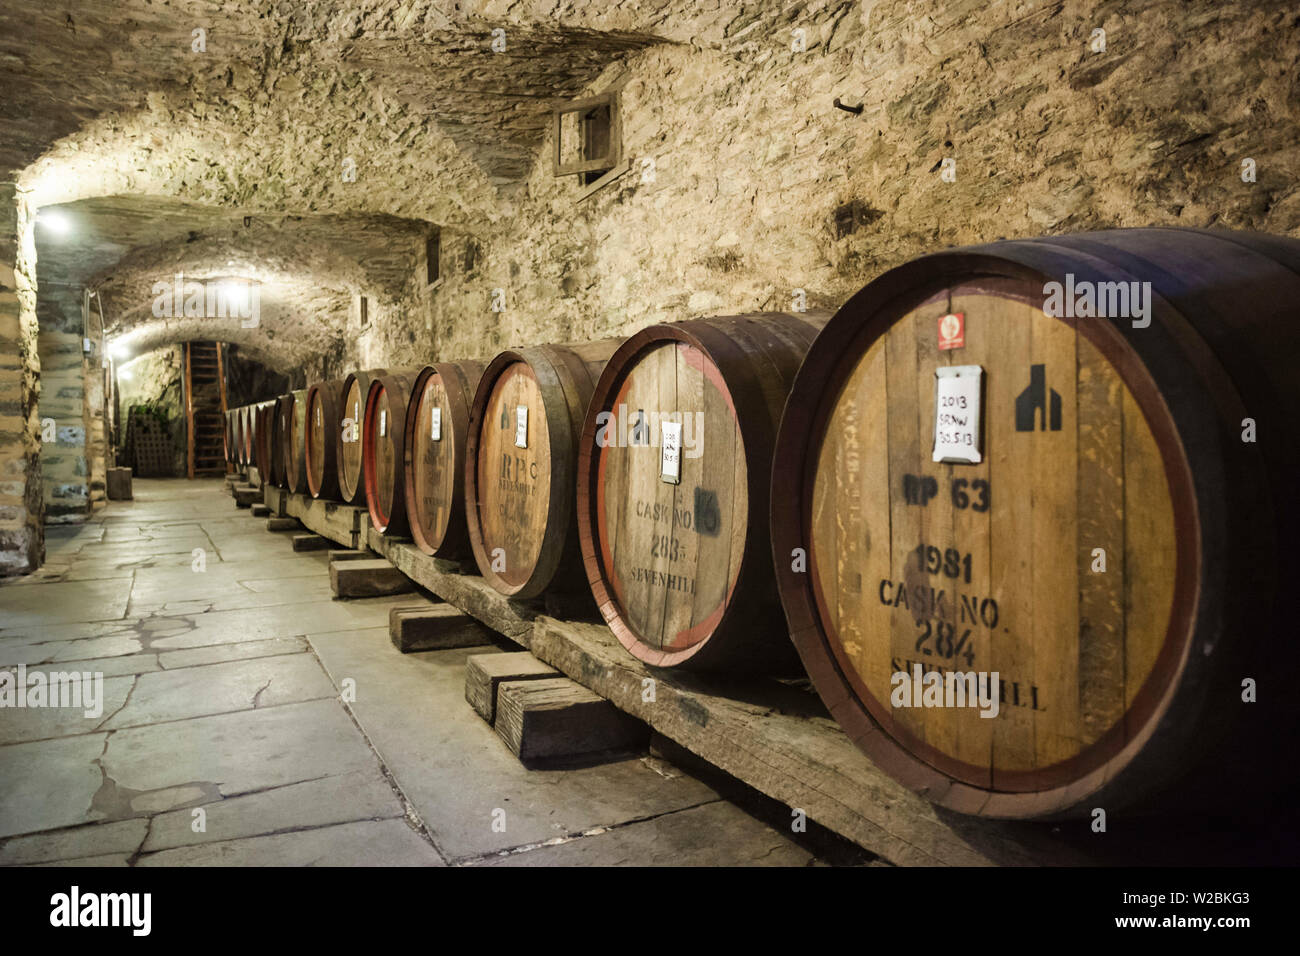 Australia, South Australia, Clare Valley, Sevenhill, Sevenhill Cellars, last remaining Jesuit-owned winery in Australia, founded in 1851, wine cellar Stock Photo